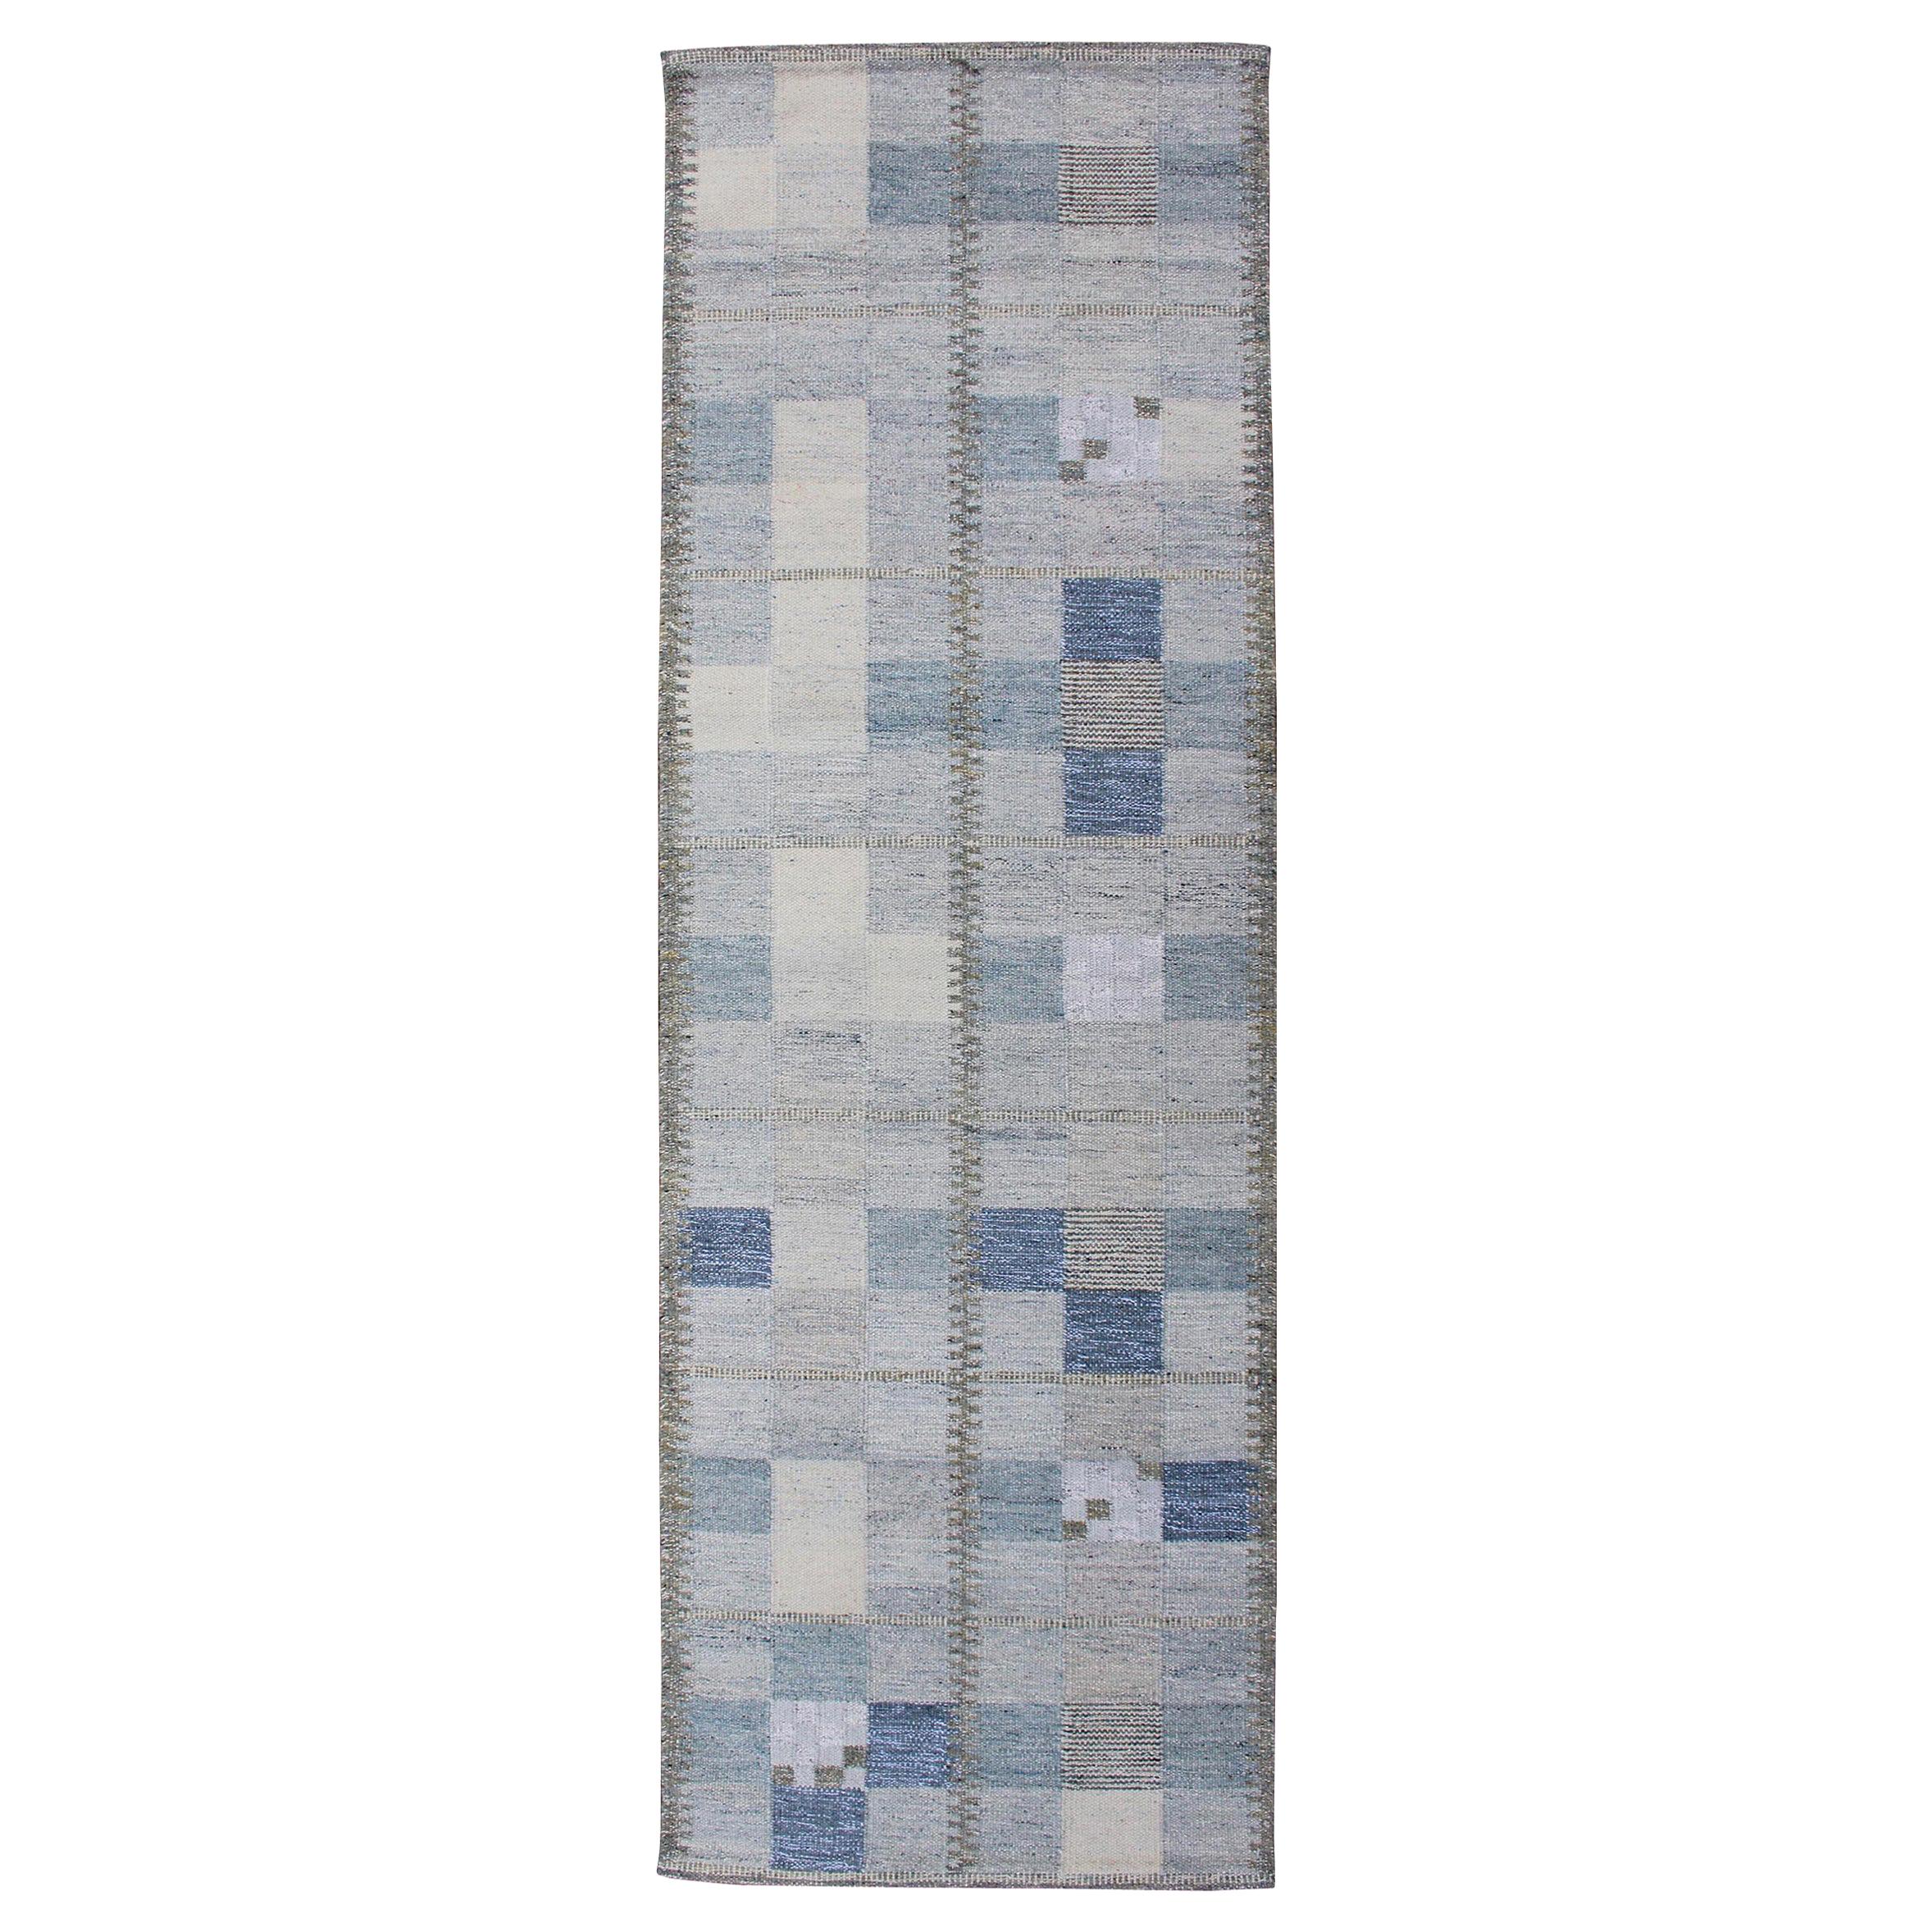 Scandinavian Style Flat-Weave Design Rug with Checkerboard Design in Gray, Blue